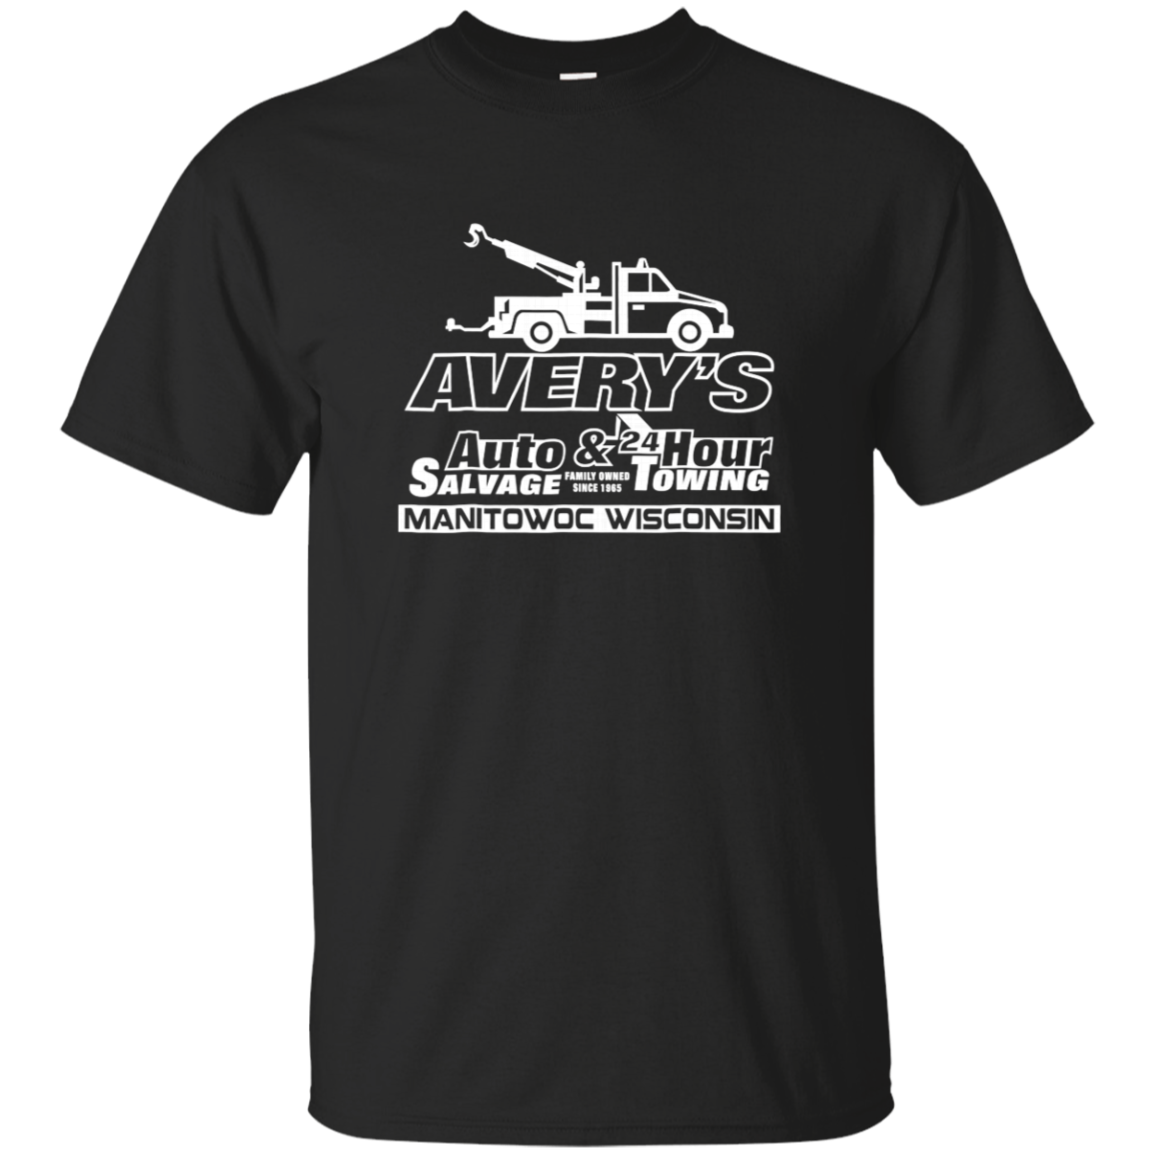 Averys Auto Manitowoc Wisconsin - Salvage & Towing T-shirt